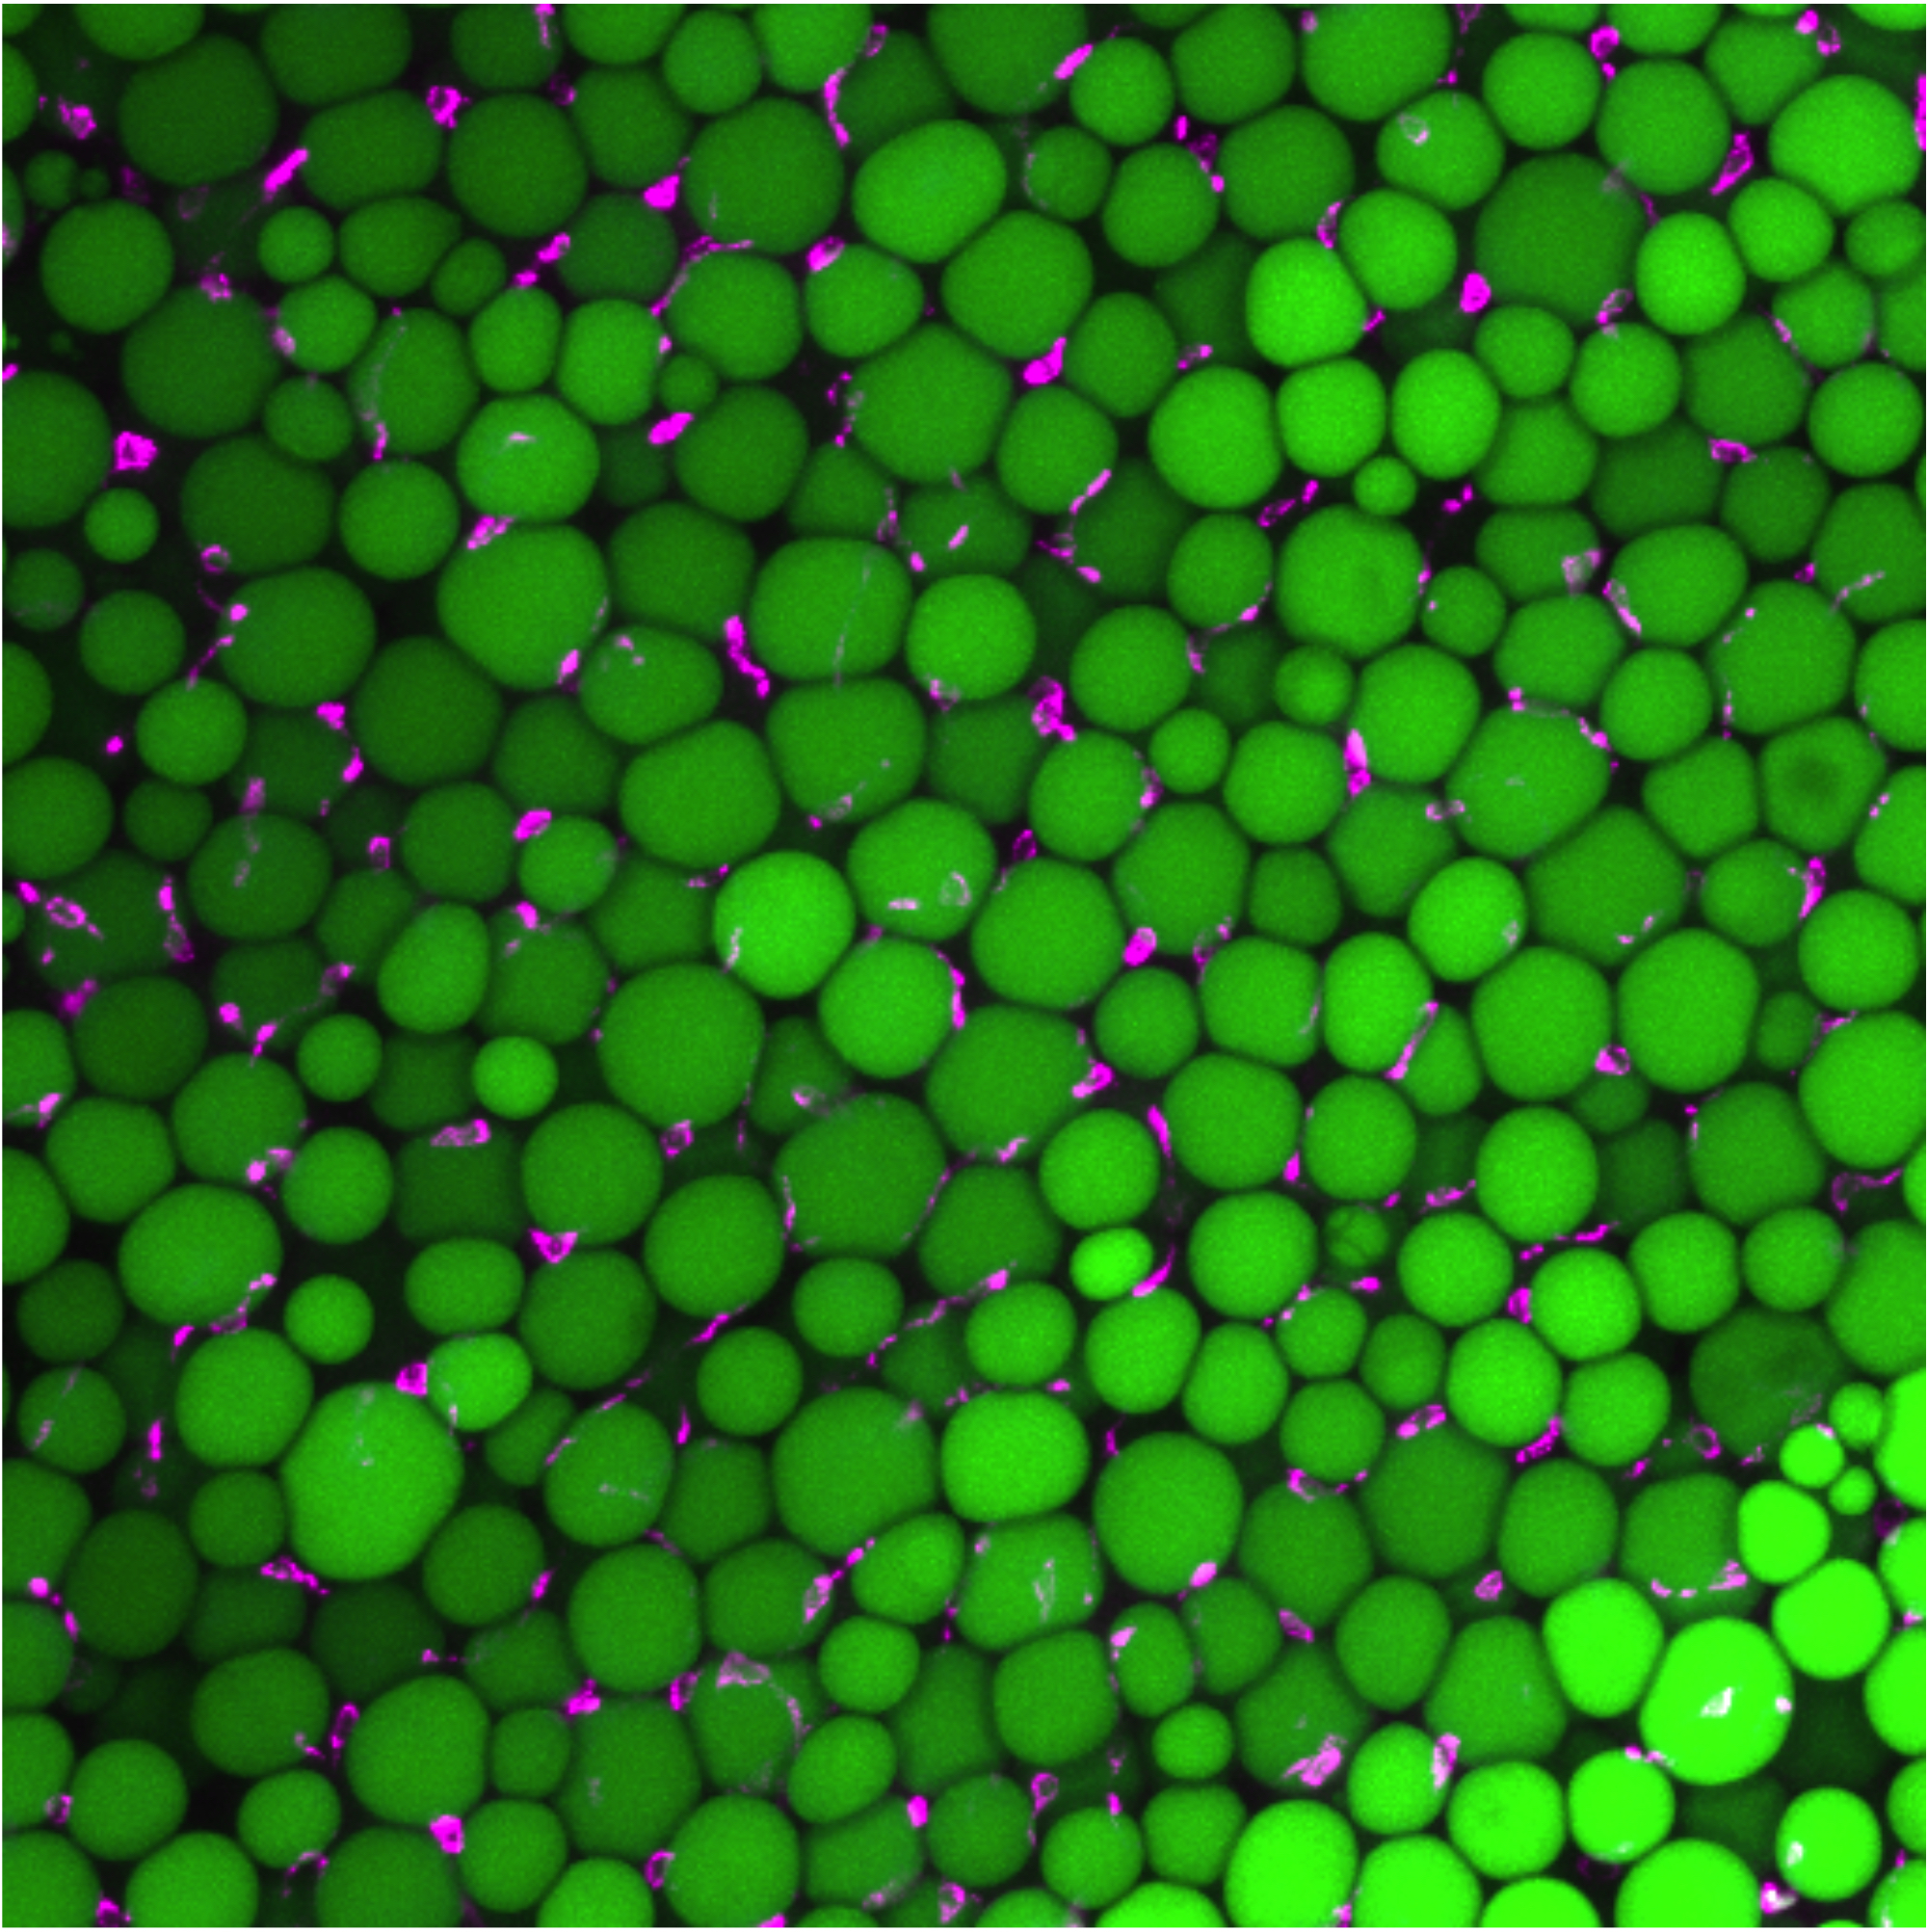 Adipose tissue immunofluorescent image showing adipocytes containing big round lipid droplets in bright green.